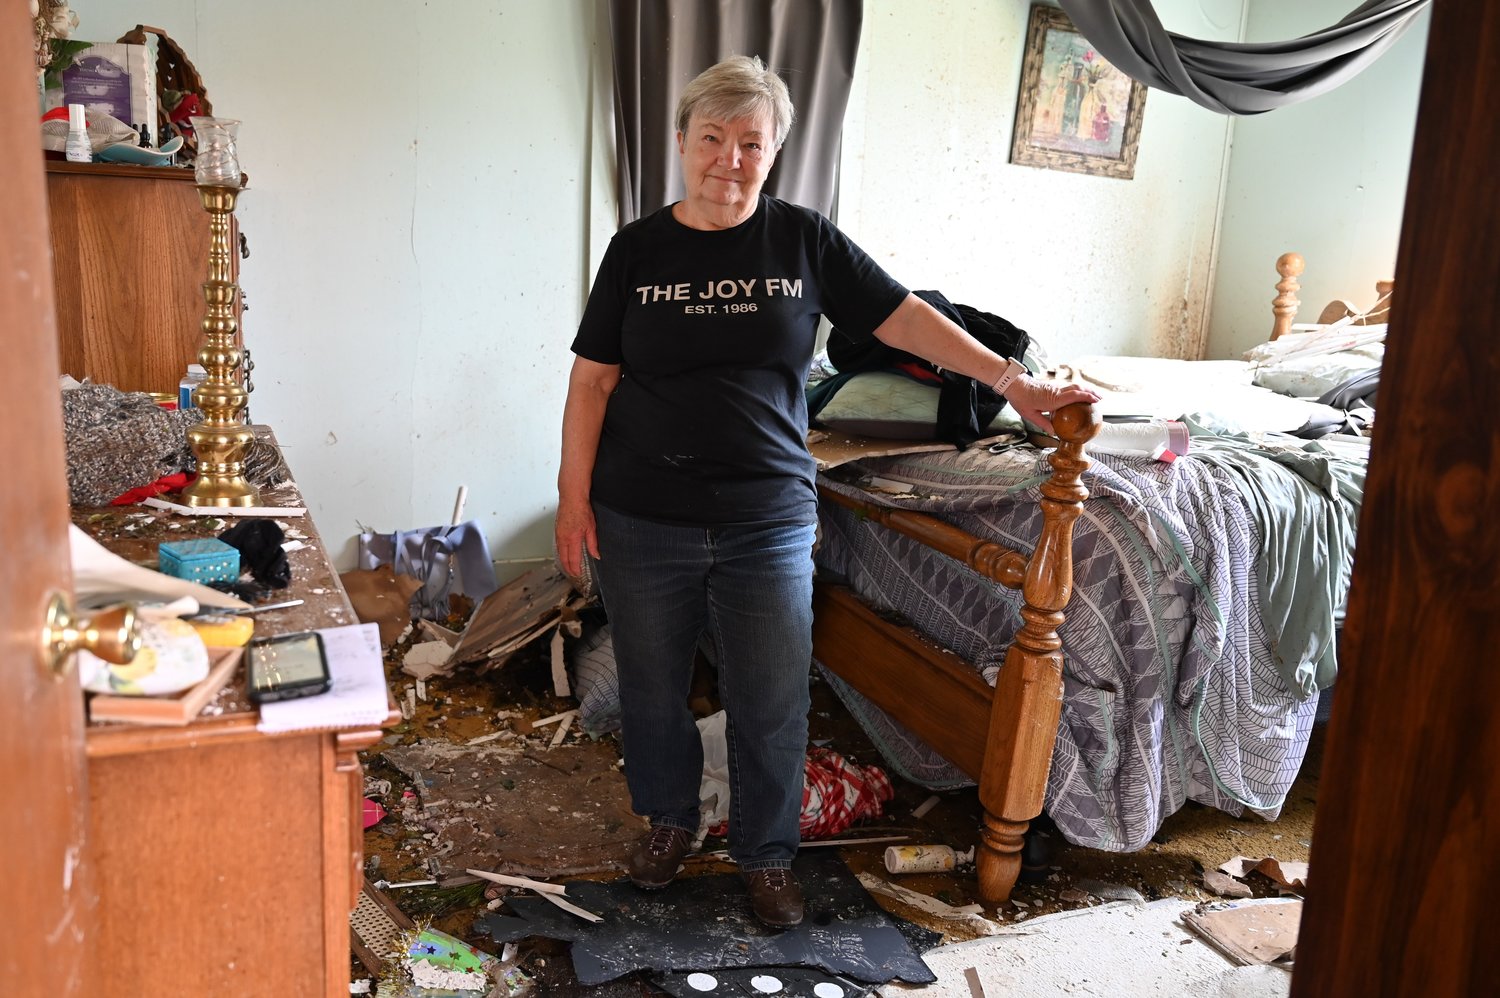 Sherry Bennett stands in her home in West Point, Ga., where she survived a violent tornado on Sunday. The twister ripped her roof off, blew away her garage, and devastated her community. (Index/Roger Alford)